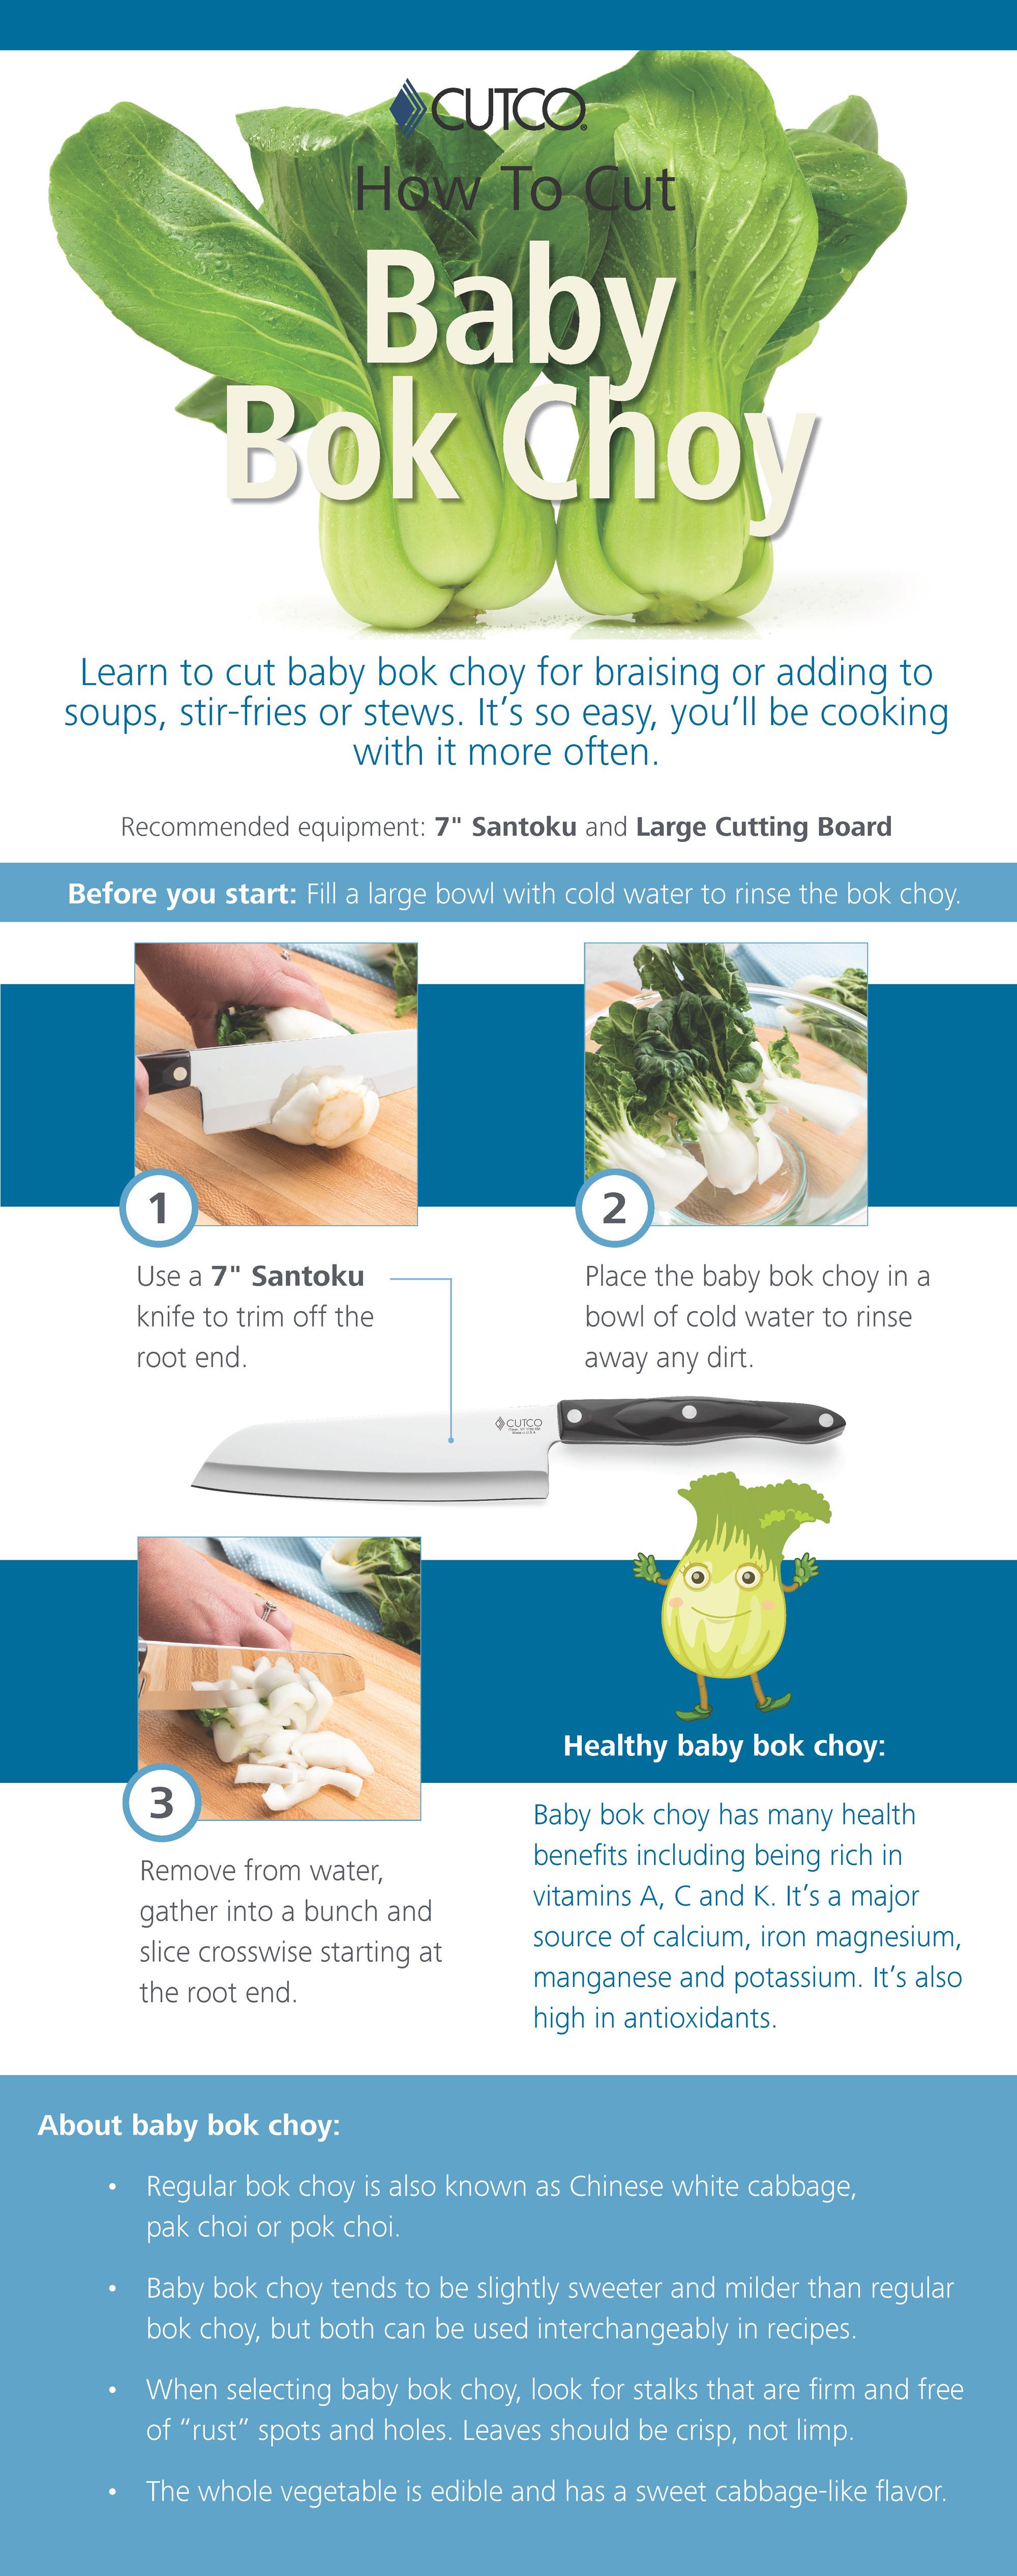 Infographic on how to cut Baby Bok Choy with a 7 inch santoku.